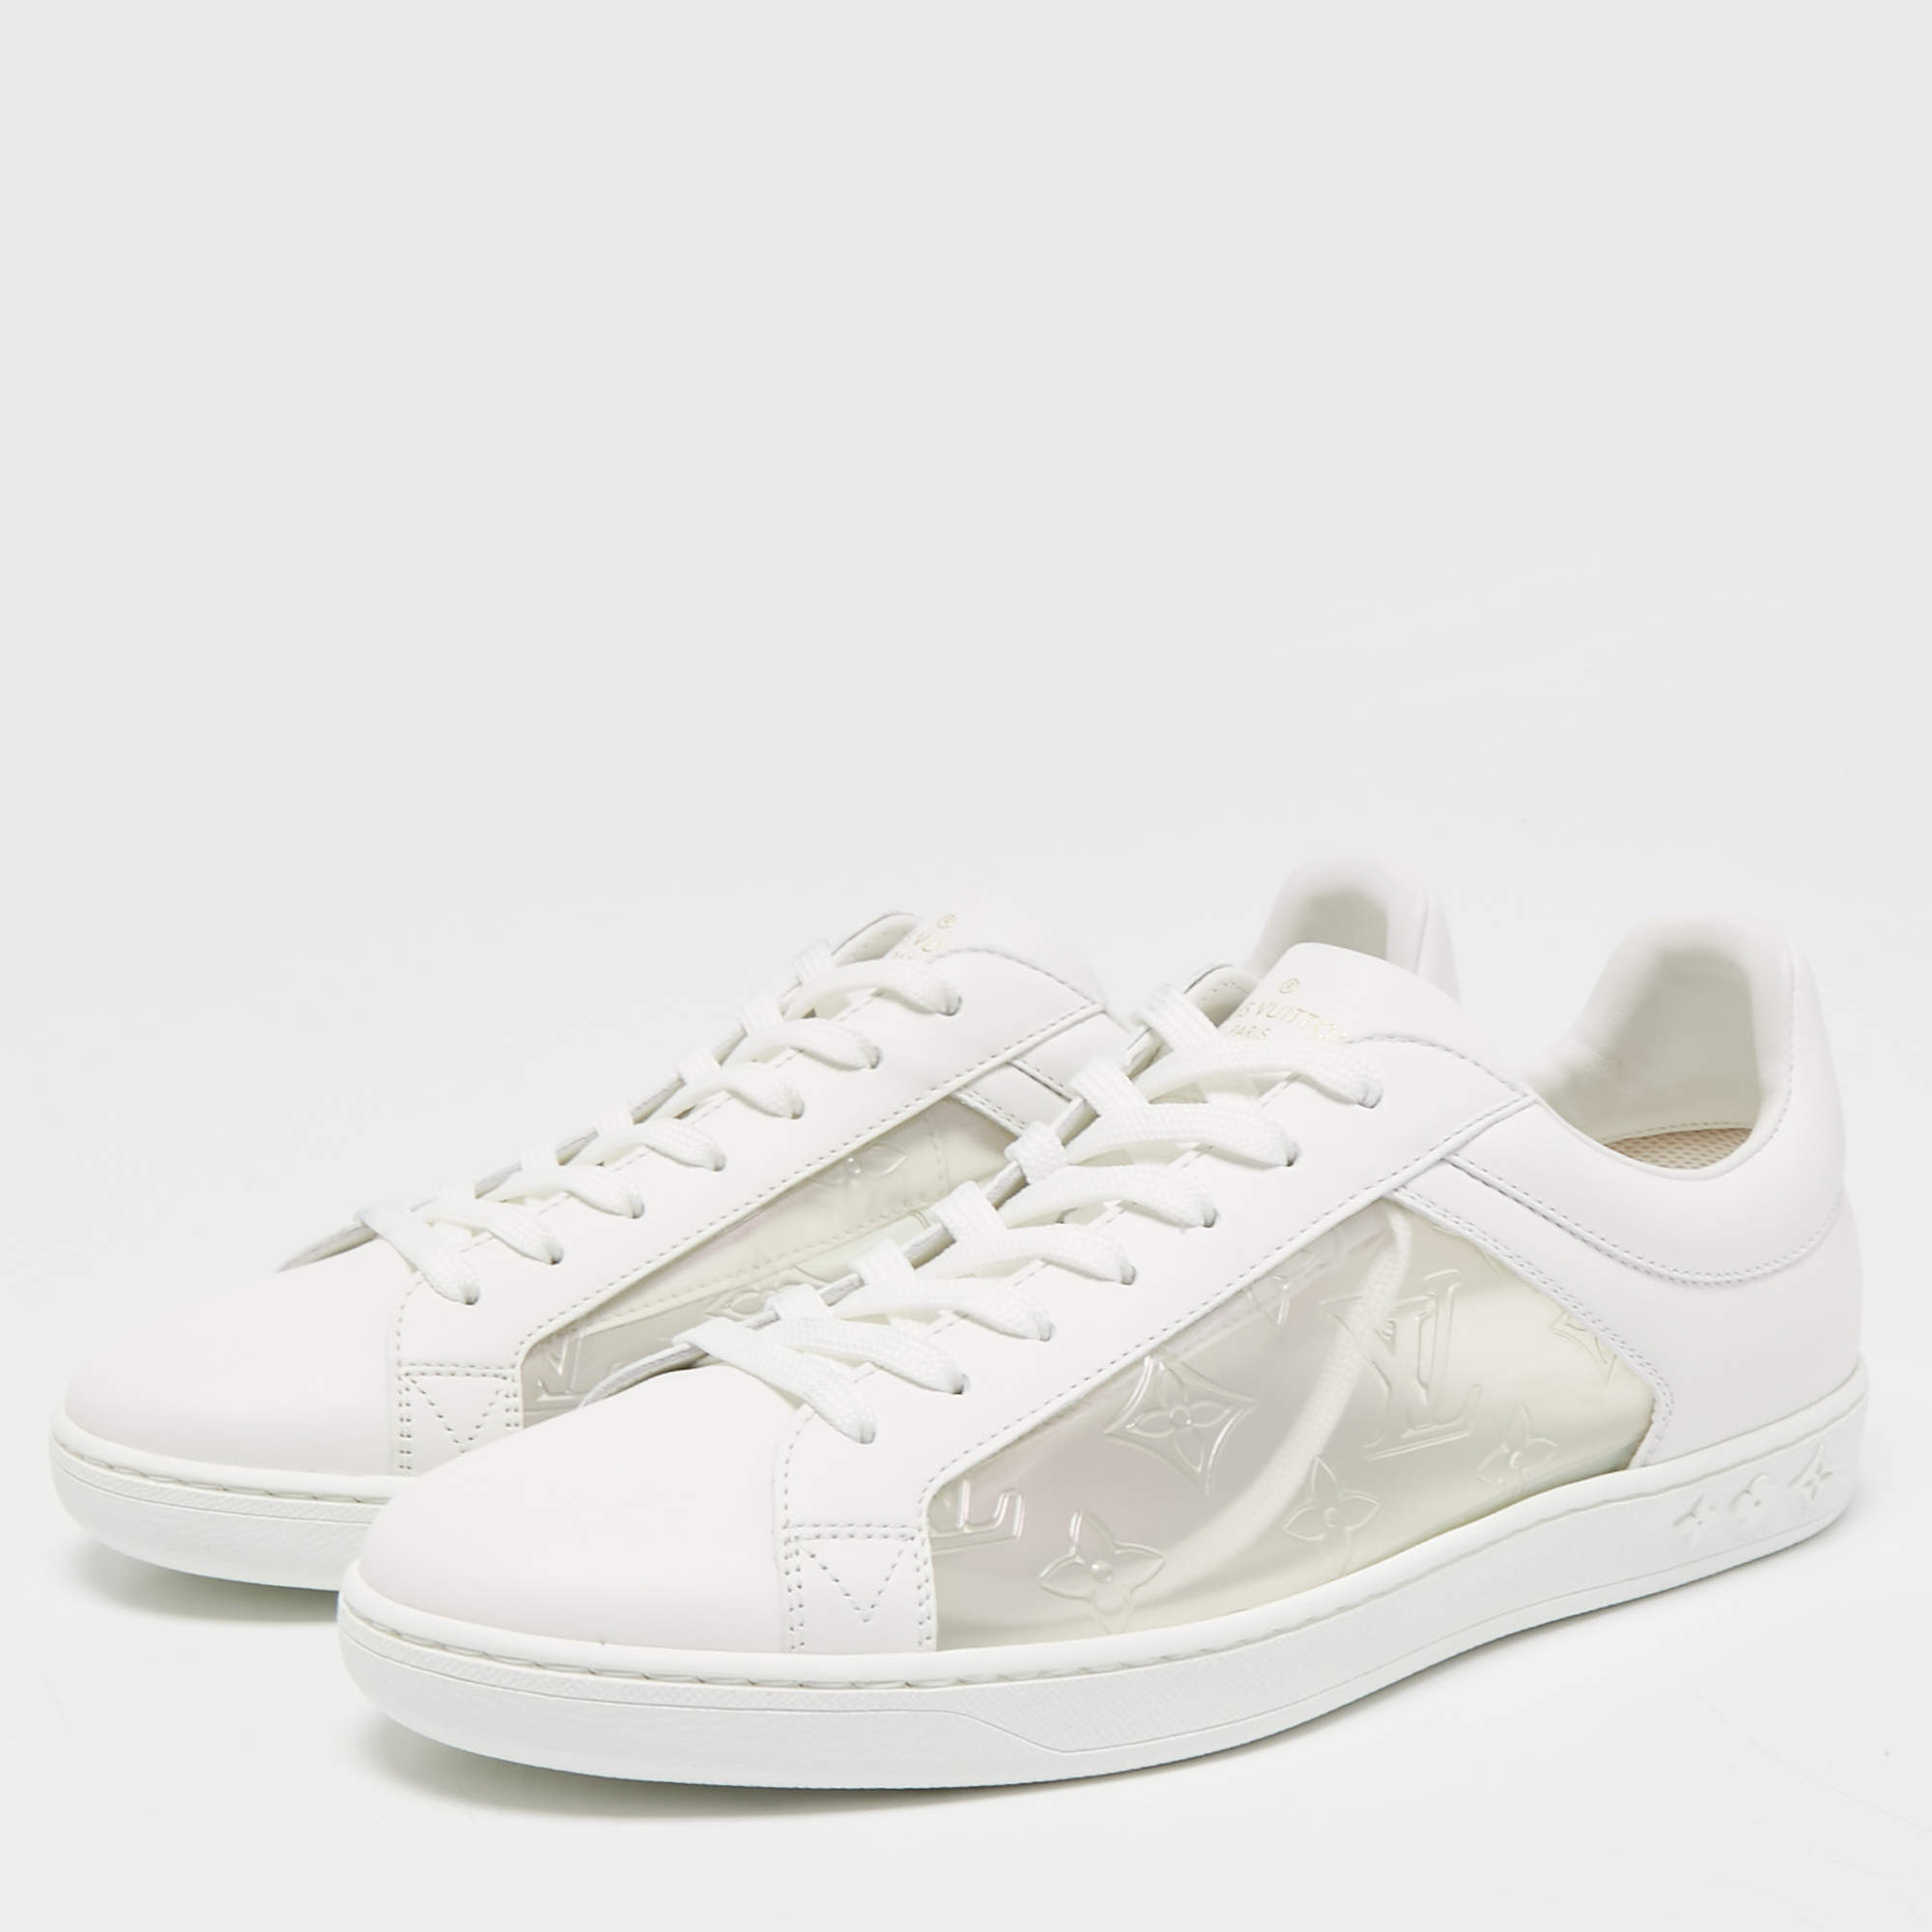 Louis Vuitton White/transparent PVC and Leather Low Top Sneakers Size 41.5